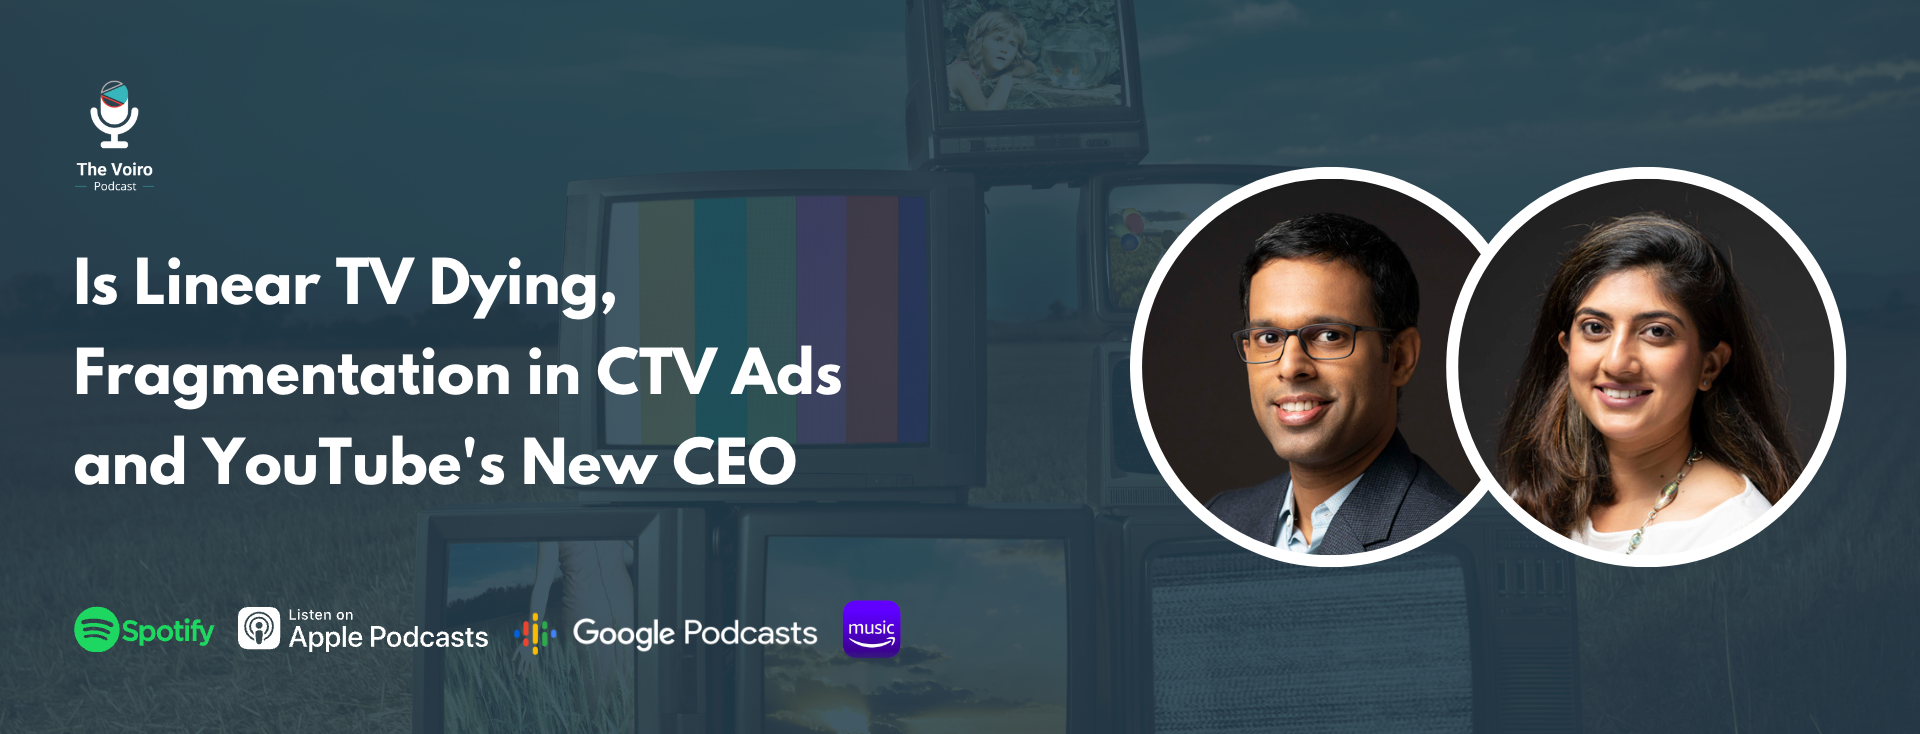 Is Linear TV Dying, Fragmentation in CTV Ads and YouTube's New CEO